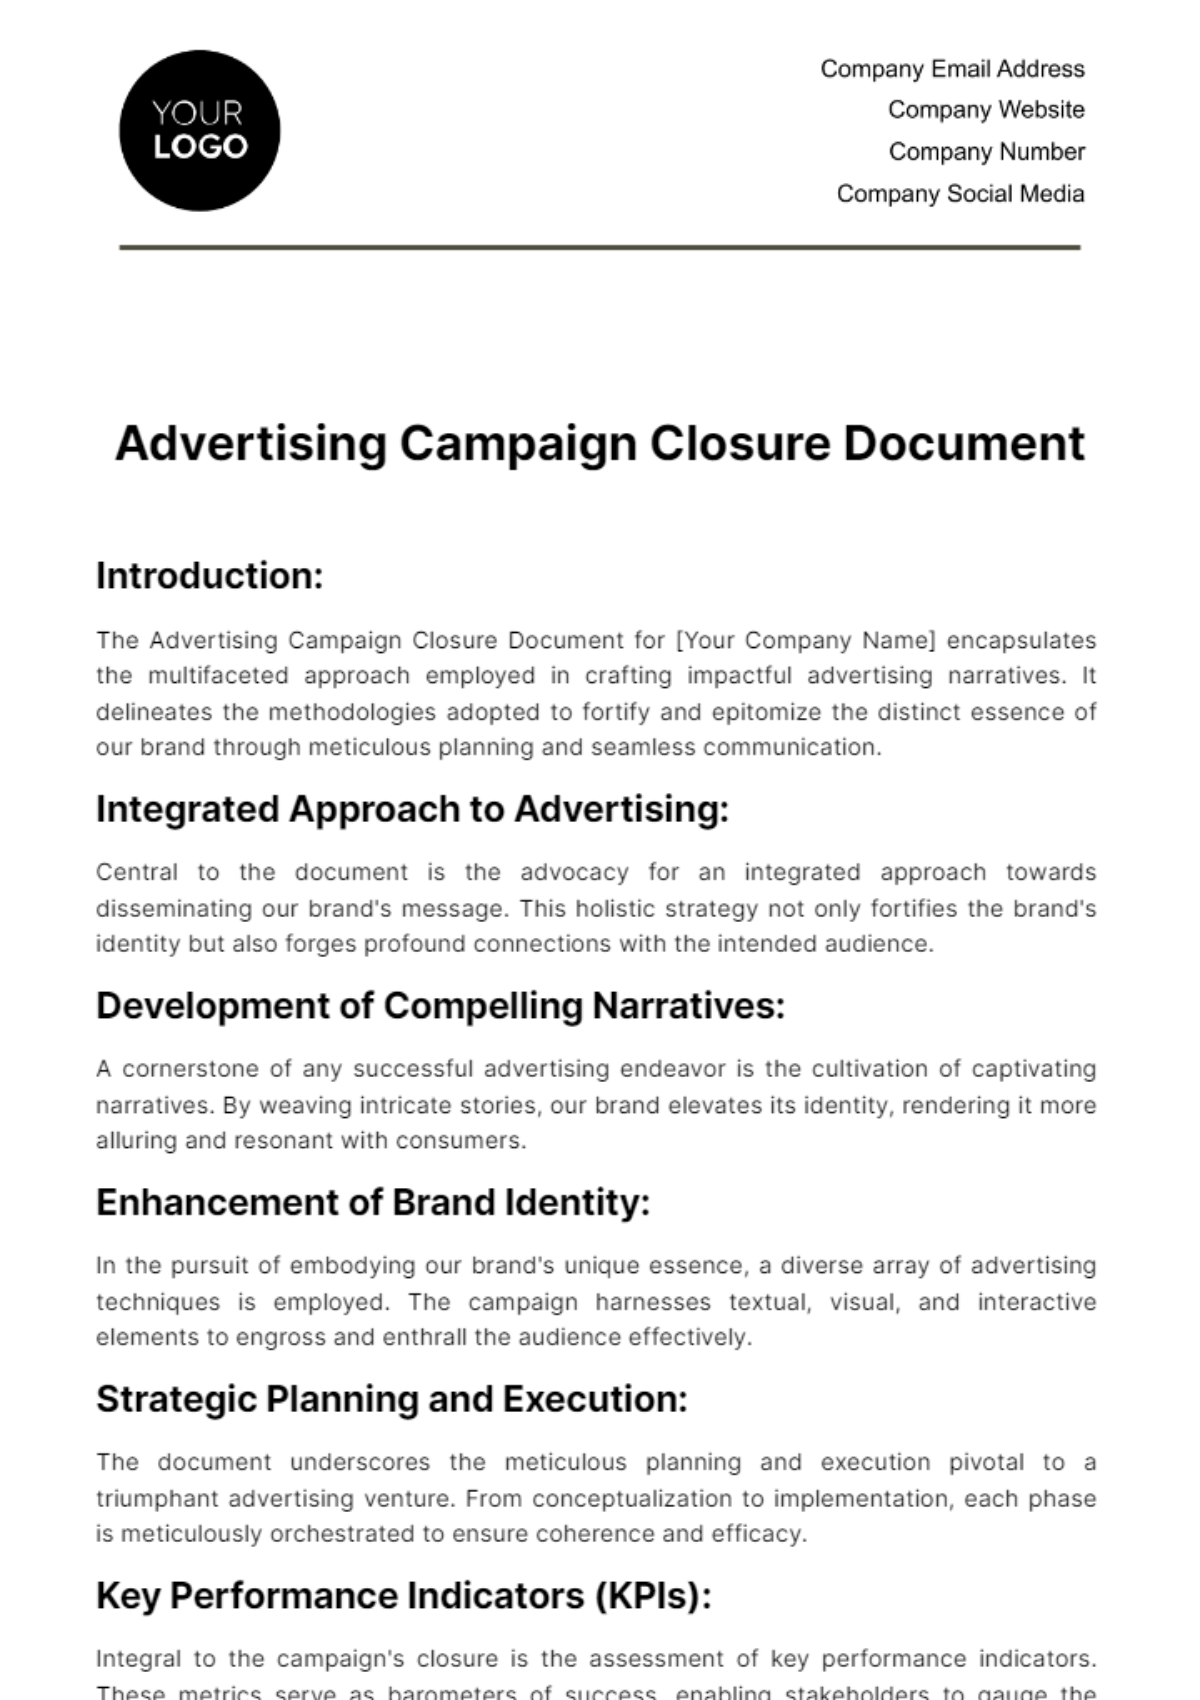 Free Advertising Campaign Closure Document Template